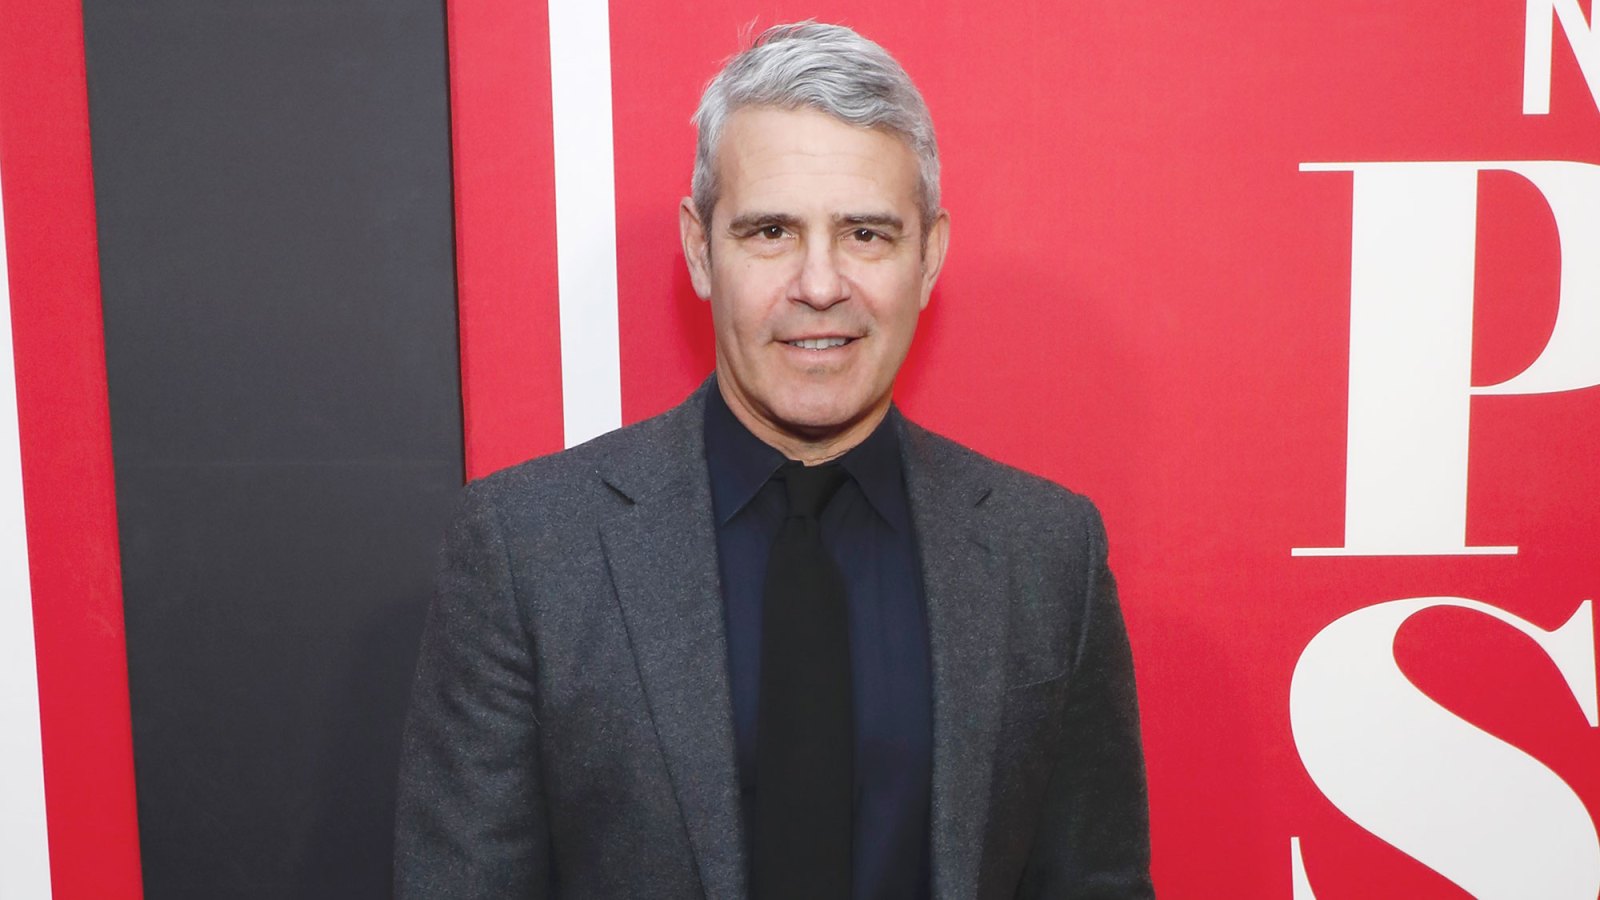 Andy Cohen Burned His Hand After Grabbing Curling Iron